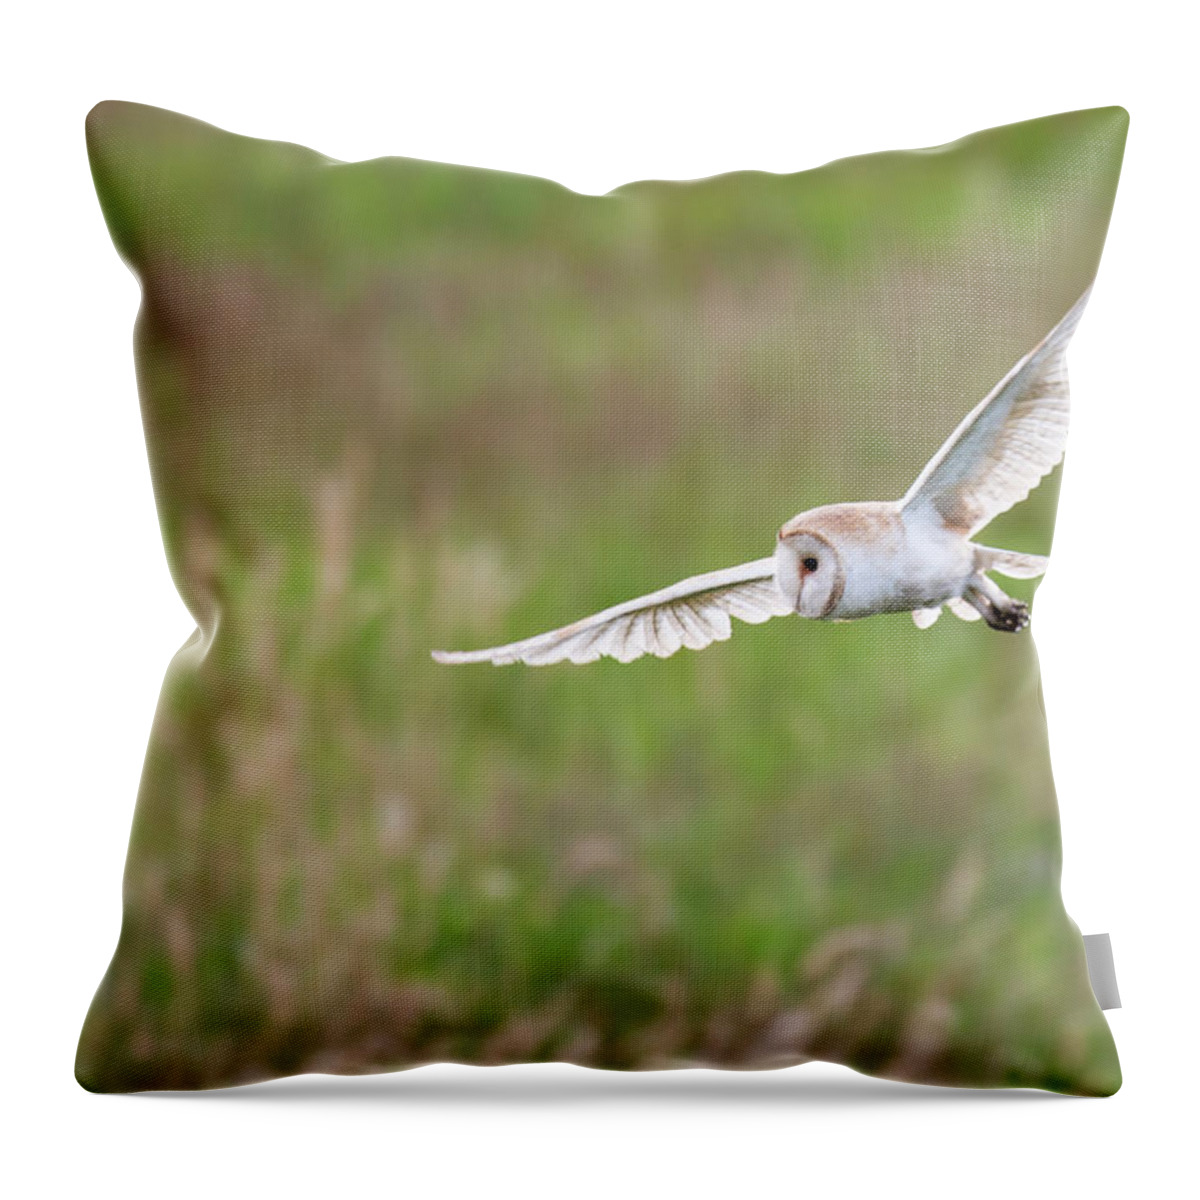 Grass Throw Pillow featuring the photograph Barn Owl In Flight Wild by James Warwick